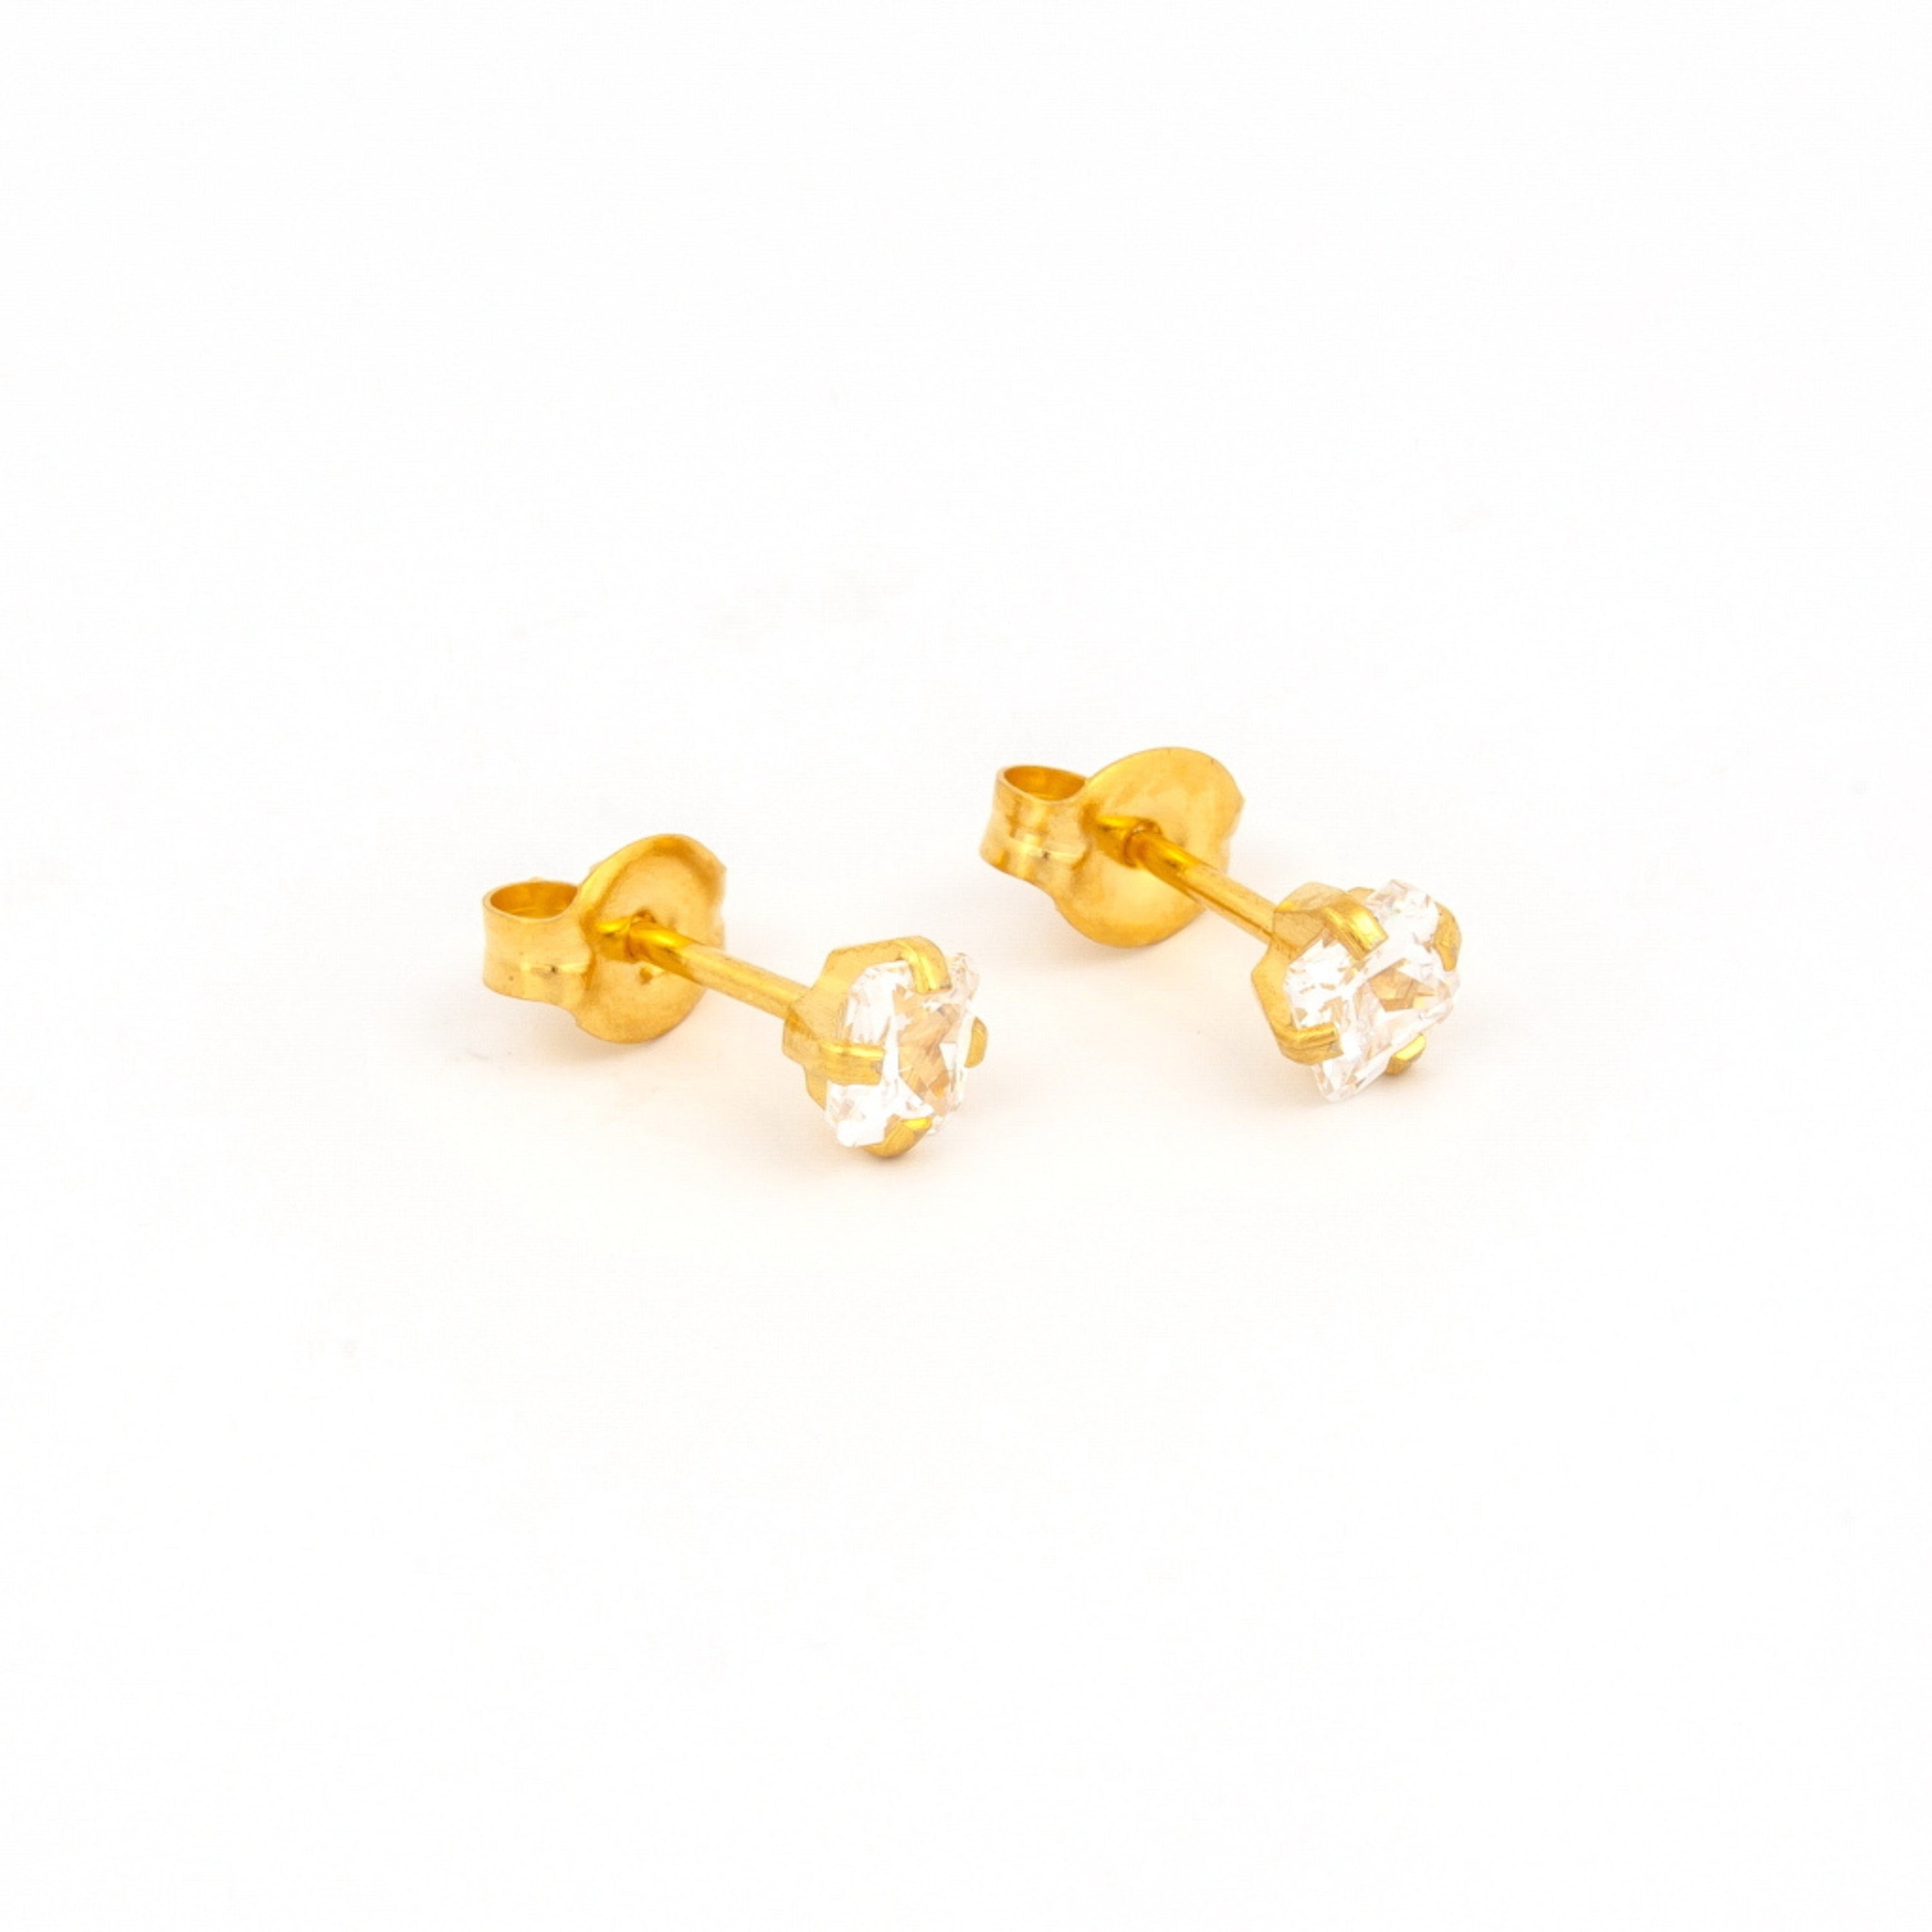 4MM Cubic Zirconia Princess Cut 24K Pure Gold Plated Ear Studs | MADE IN USA | Ideal for everyday wear